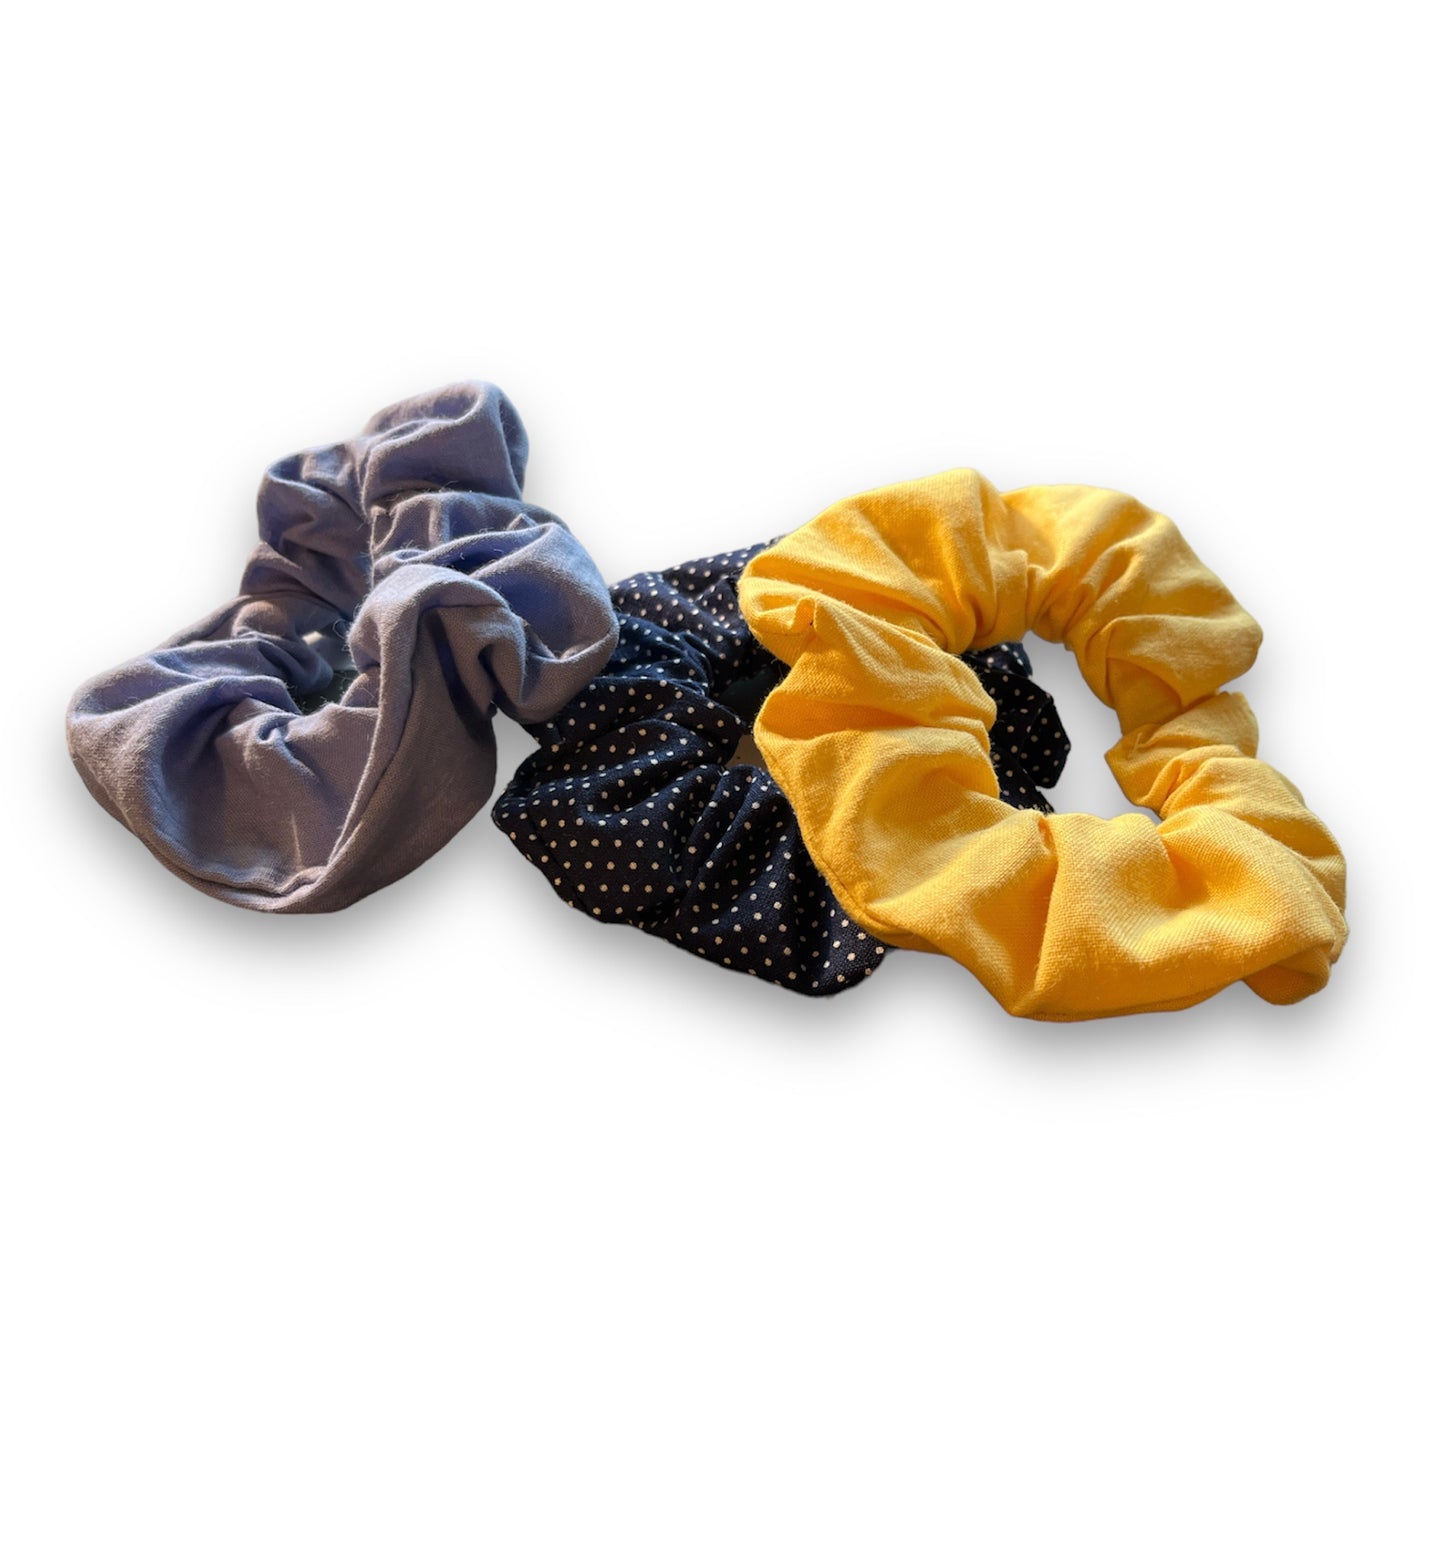 Yellow Upcycled Scrunchie